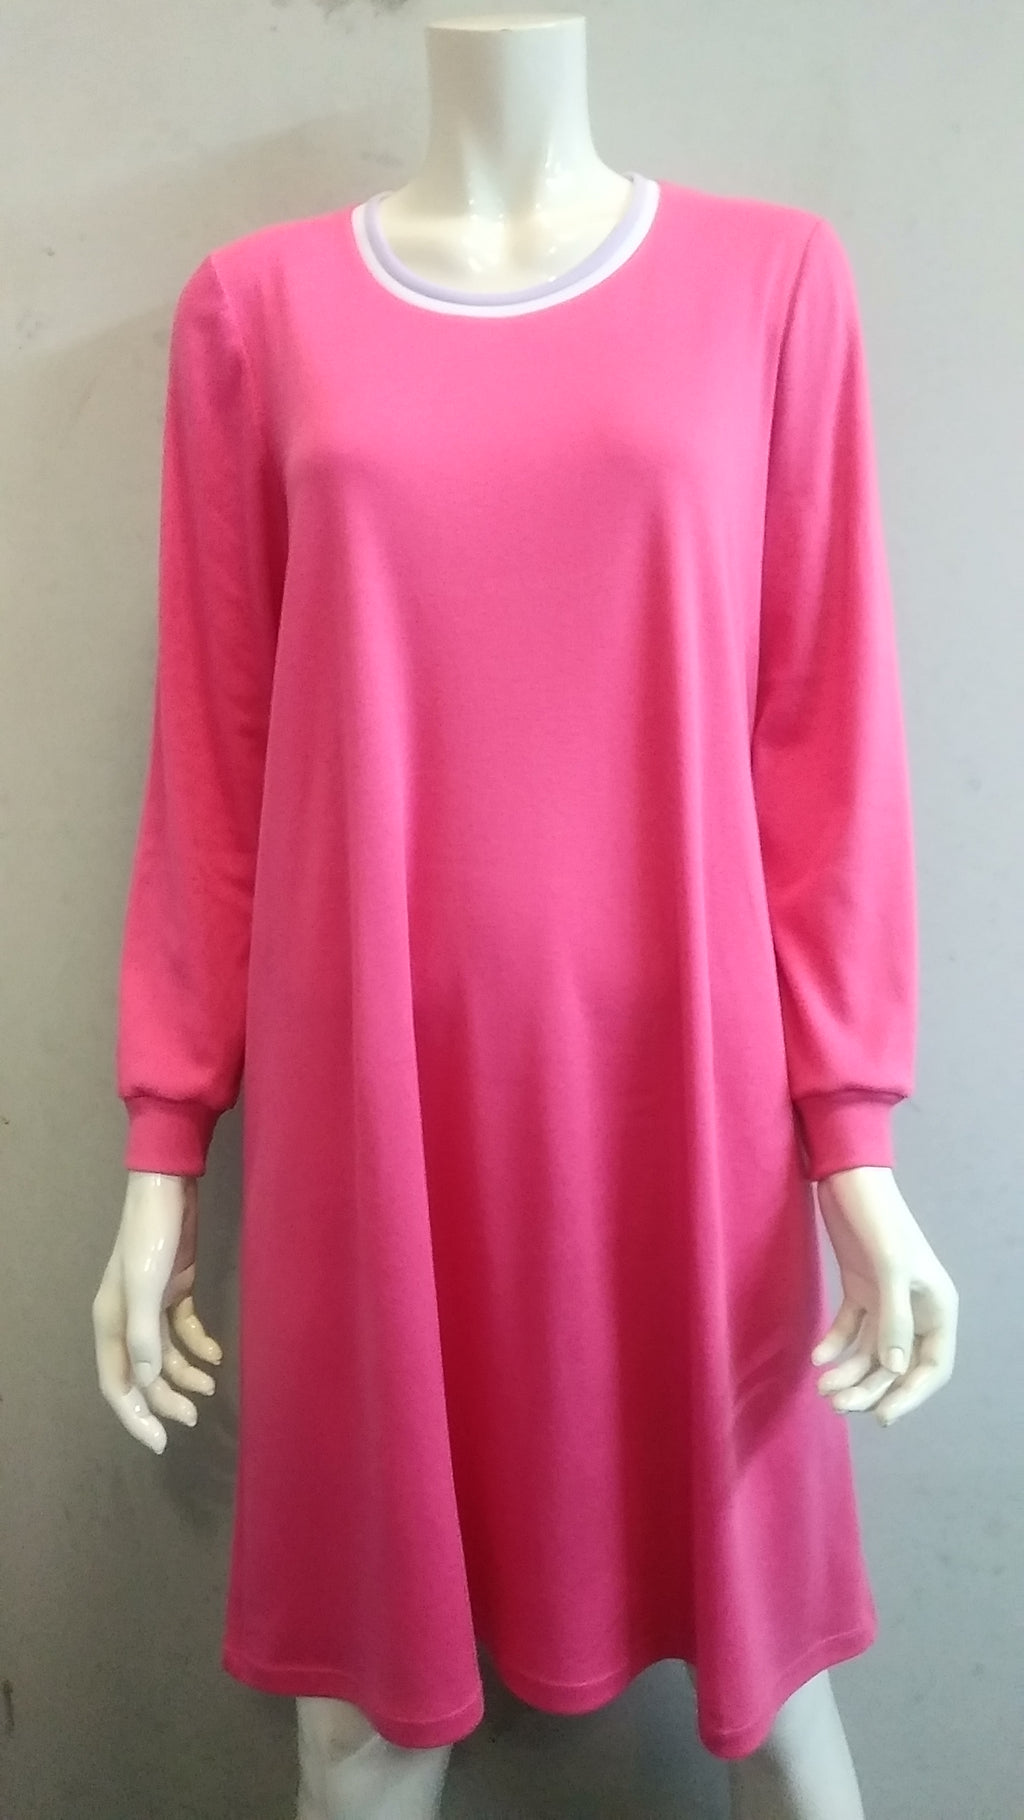 (L61) Ladies Nightie - Long Sleeves -ROSE PINK with Lilac & White Neck Band